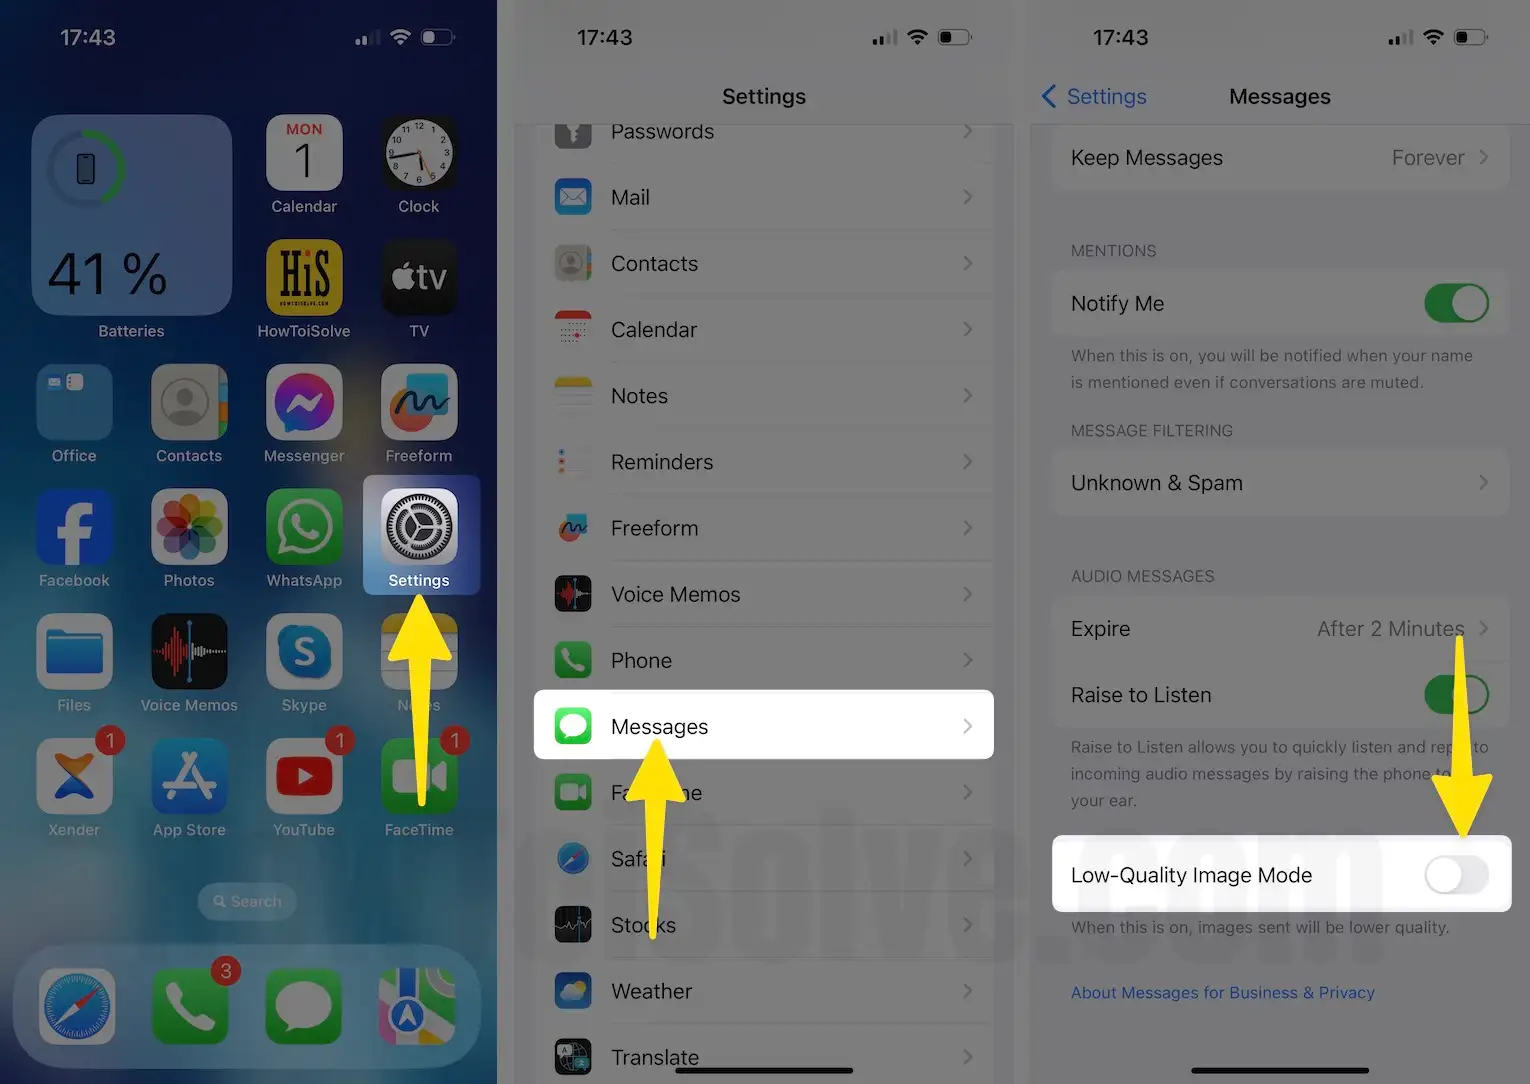 Launch the settings app tap on messages turn off low-quality image mode on iPhone